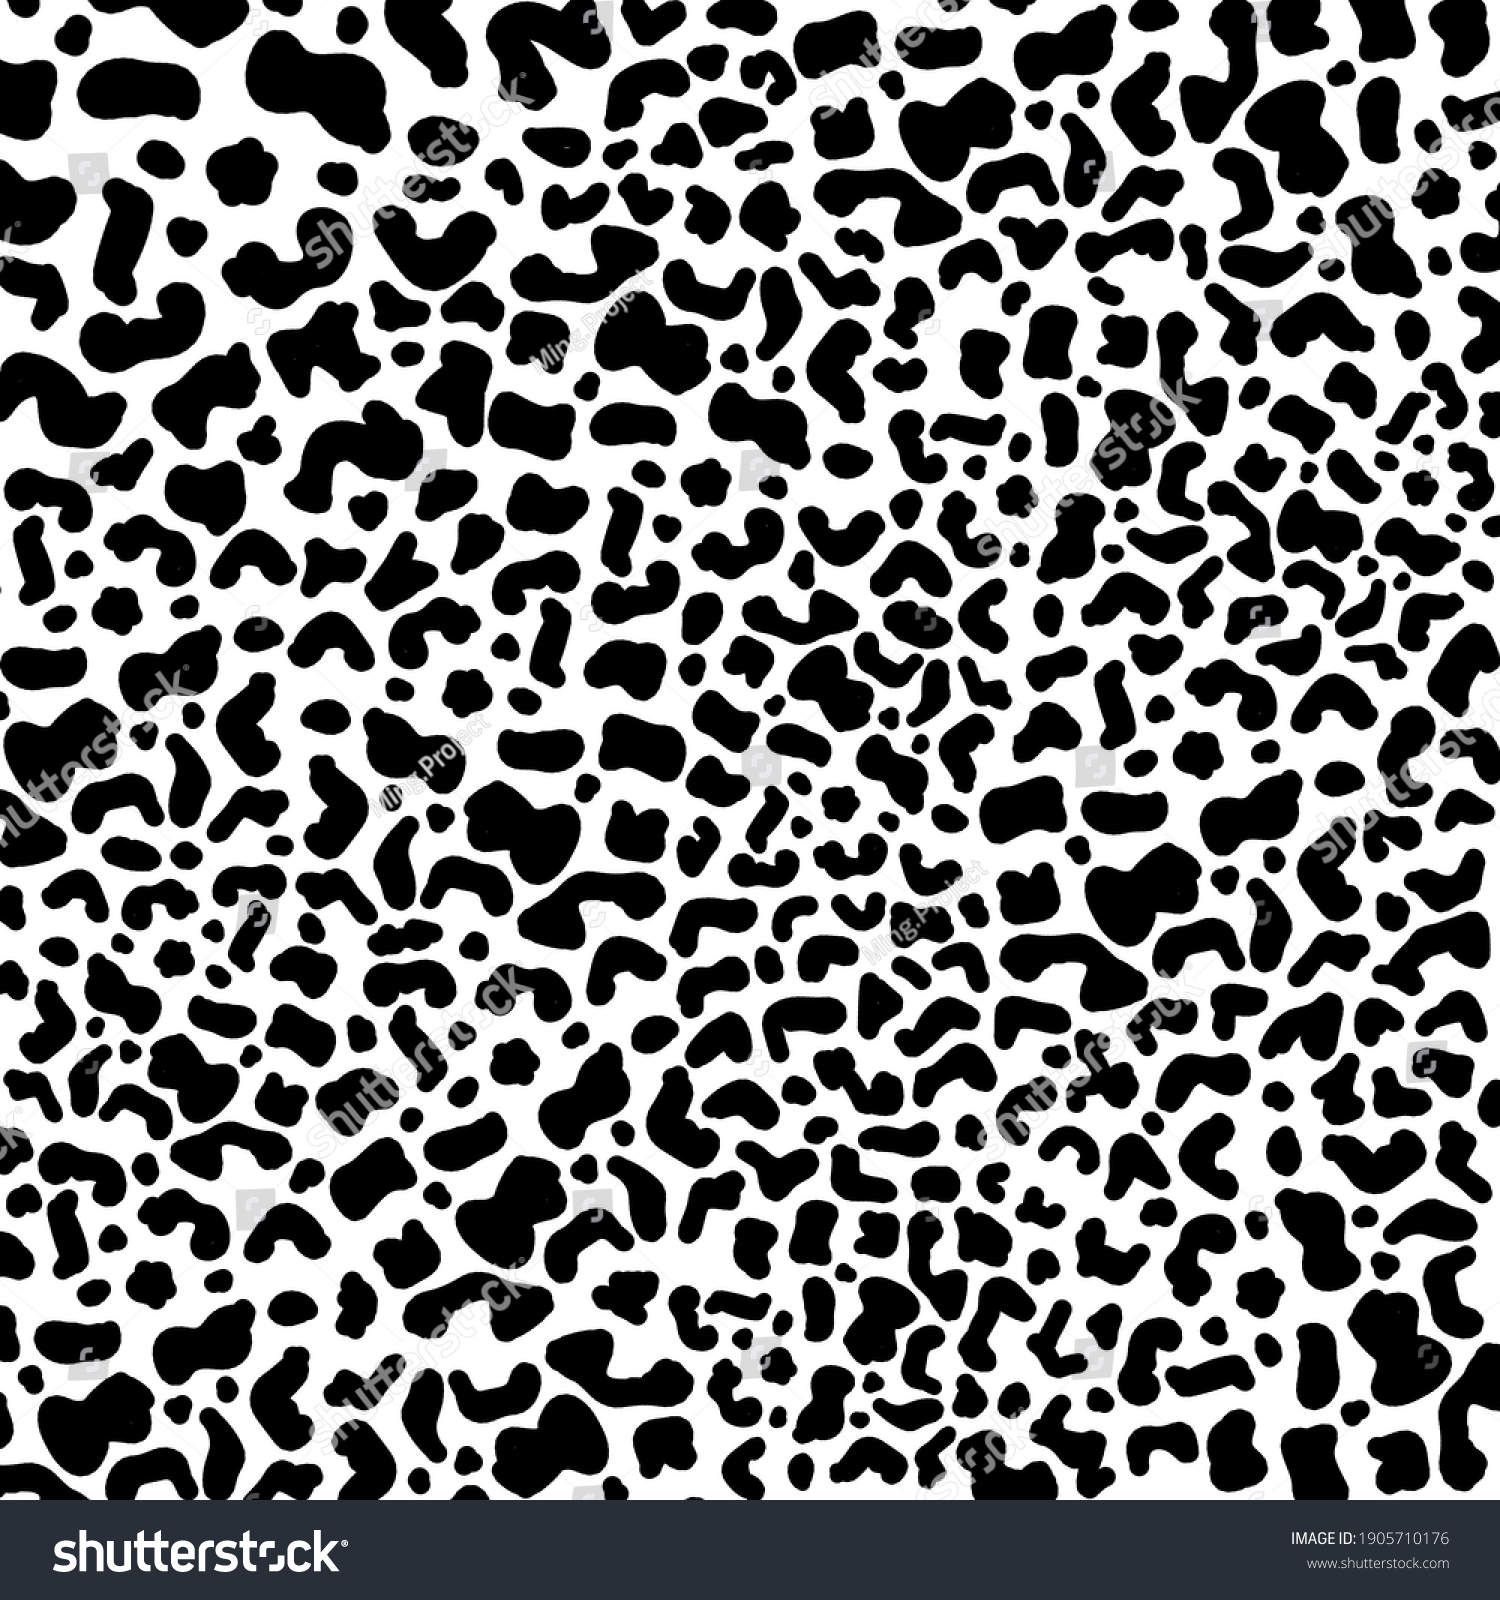 This Leopard Print 1 Designed Style Stock Illustration 1905710176 ...